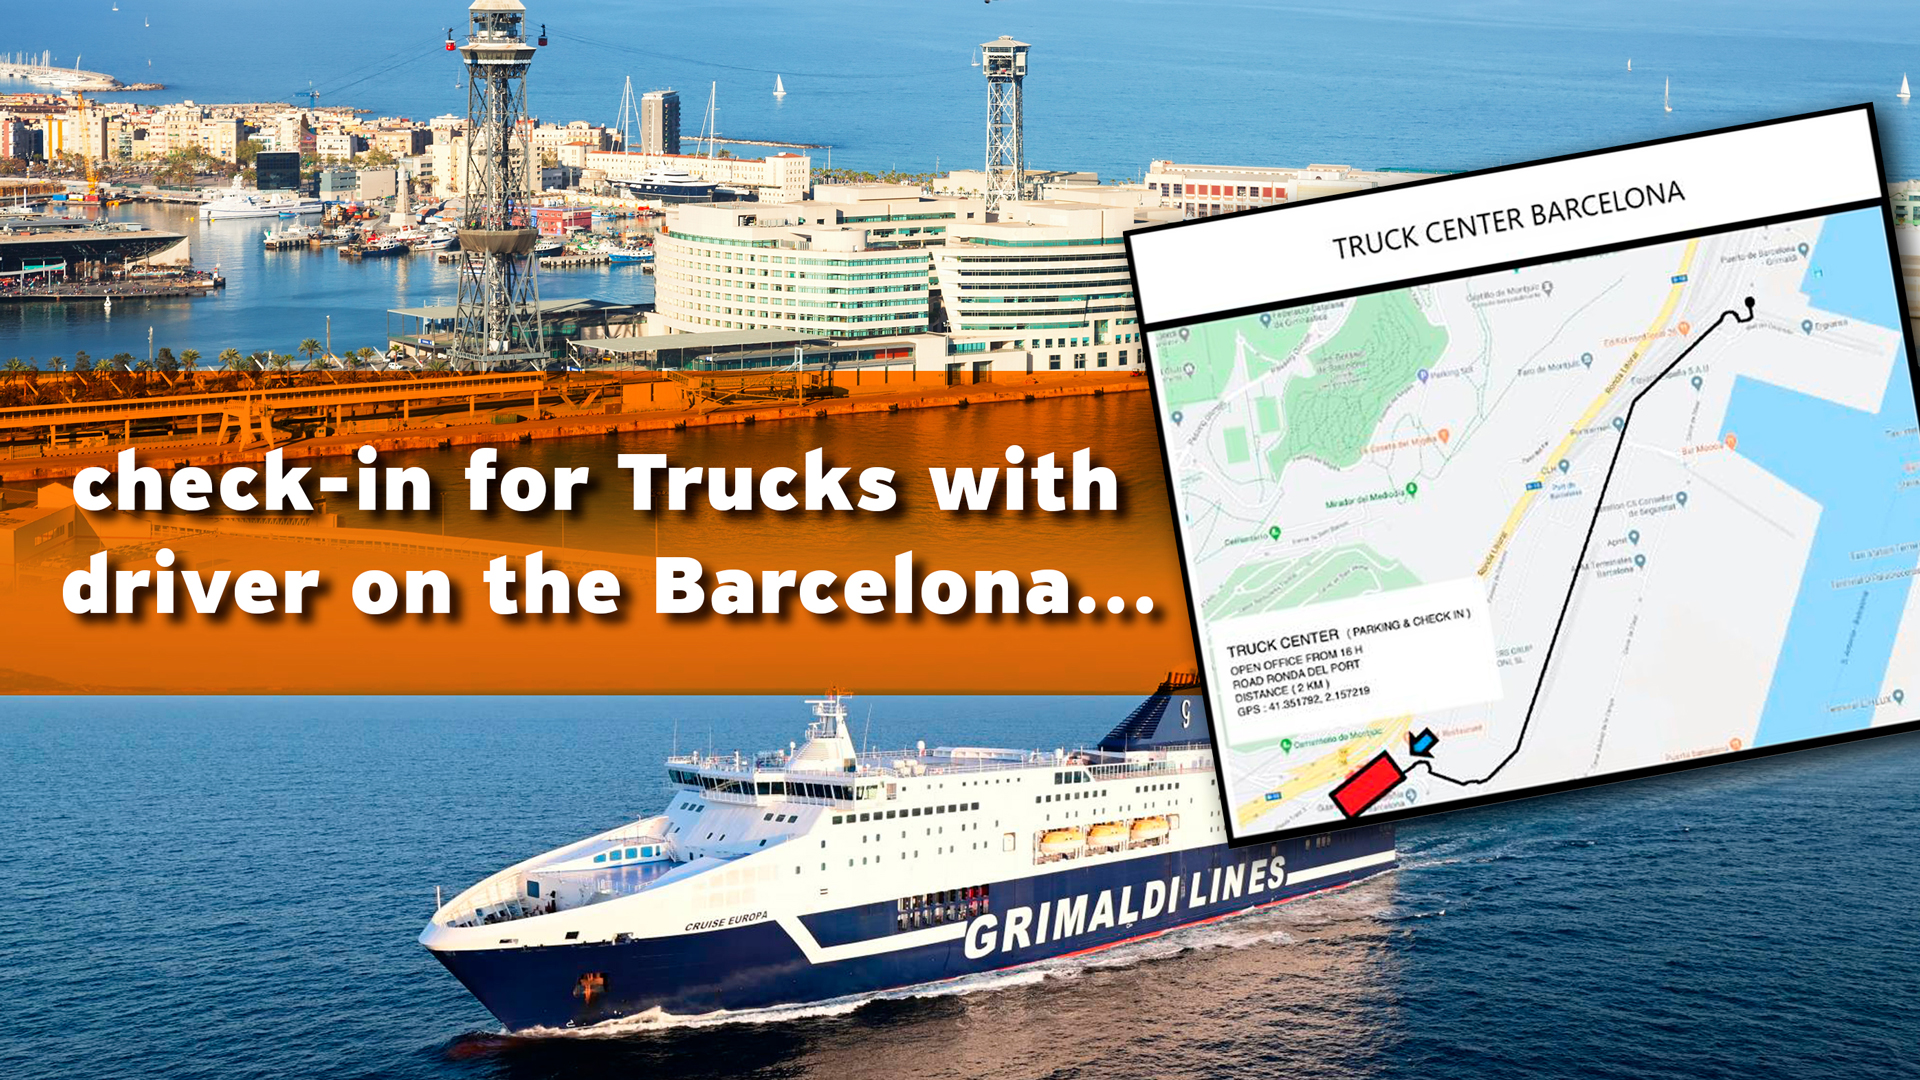 Check-in for Trucks with driver on the Barcelona